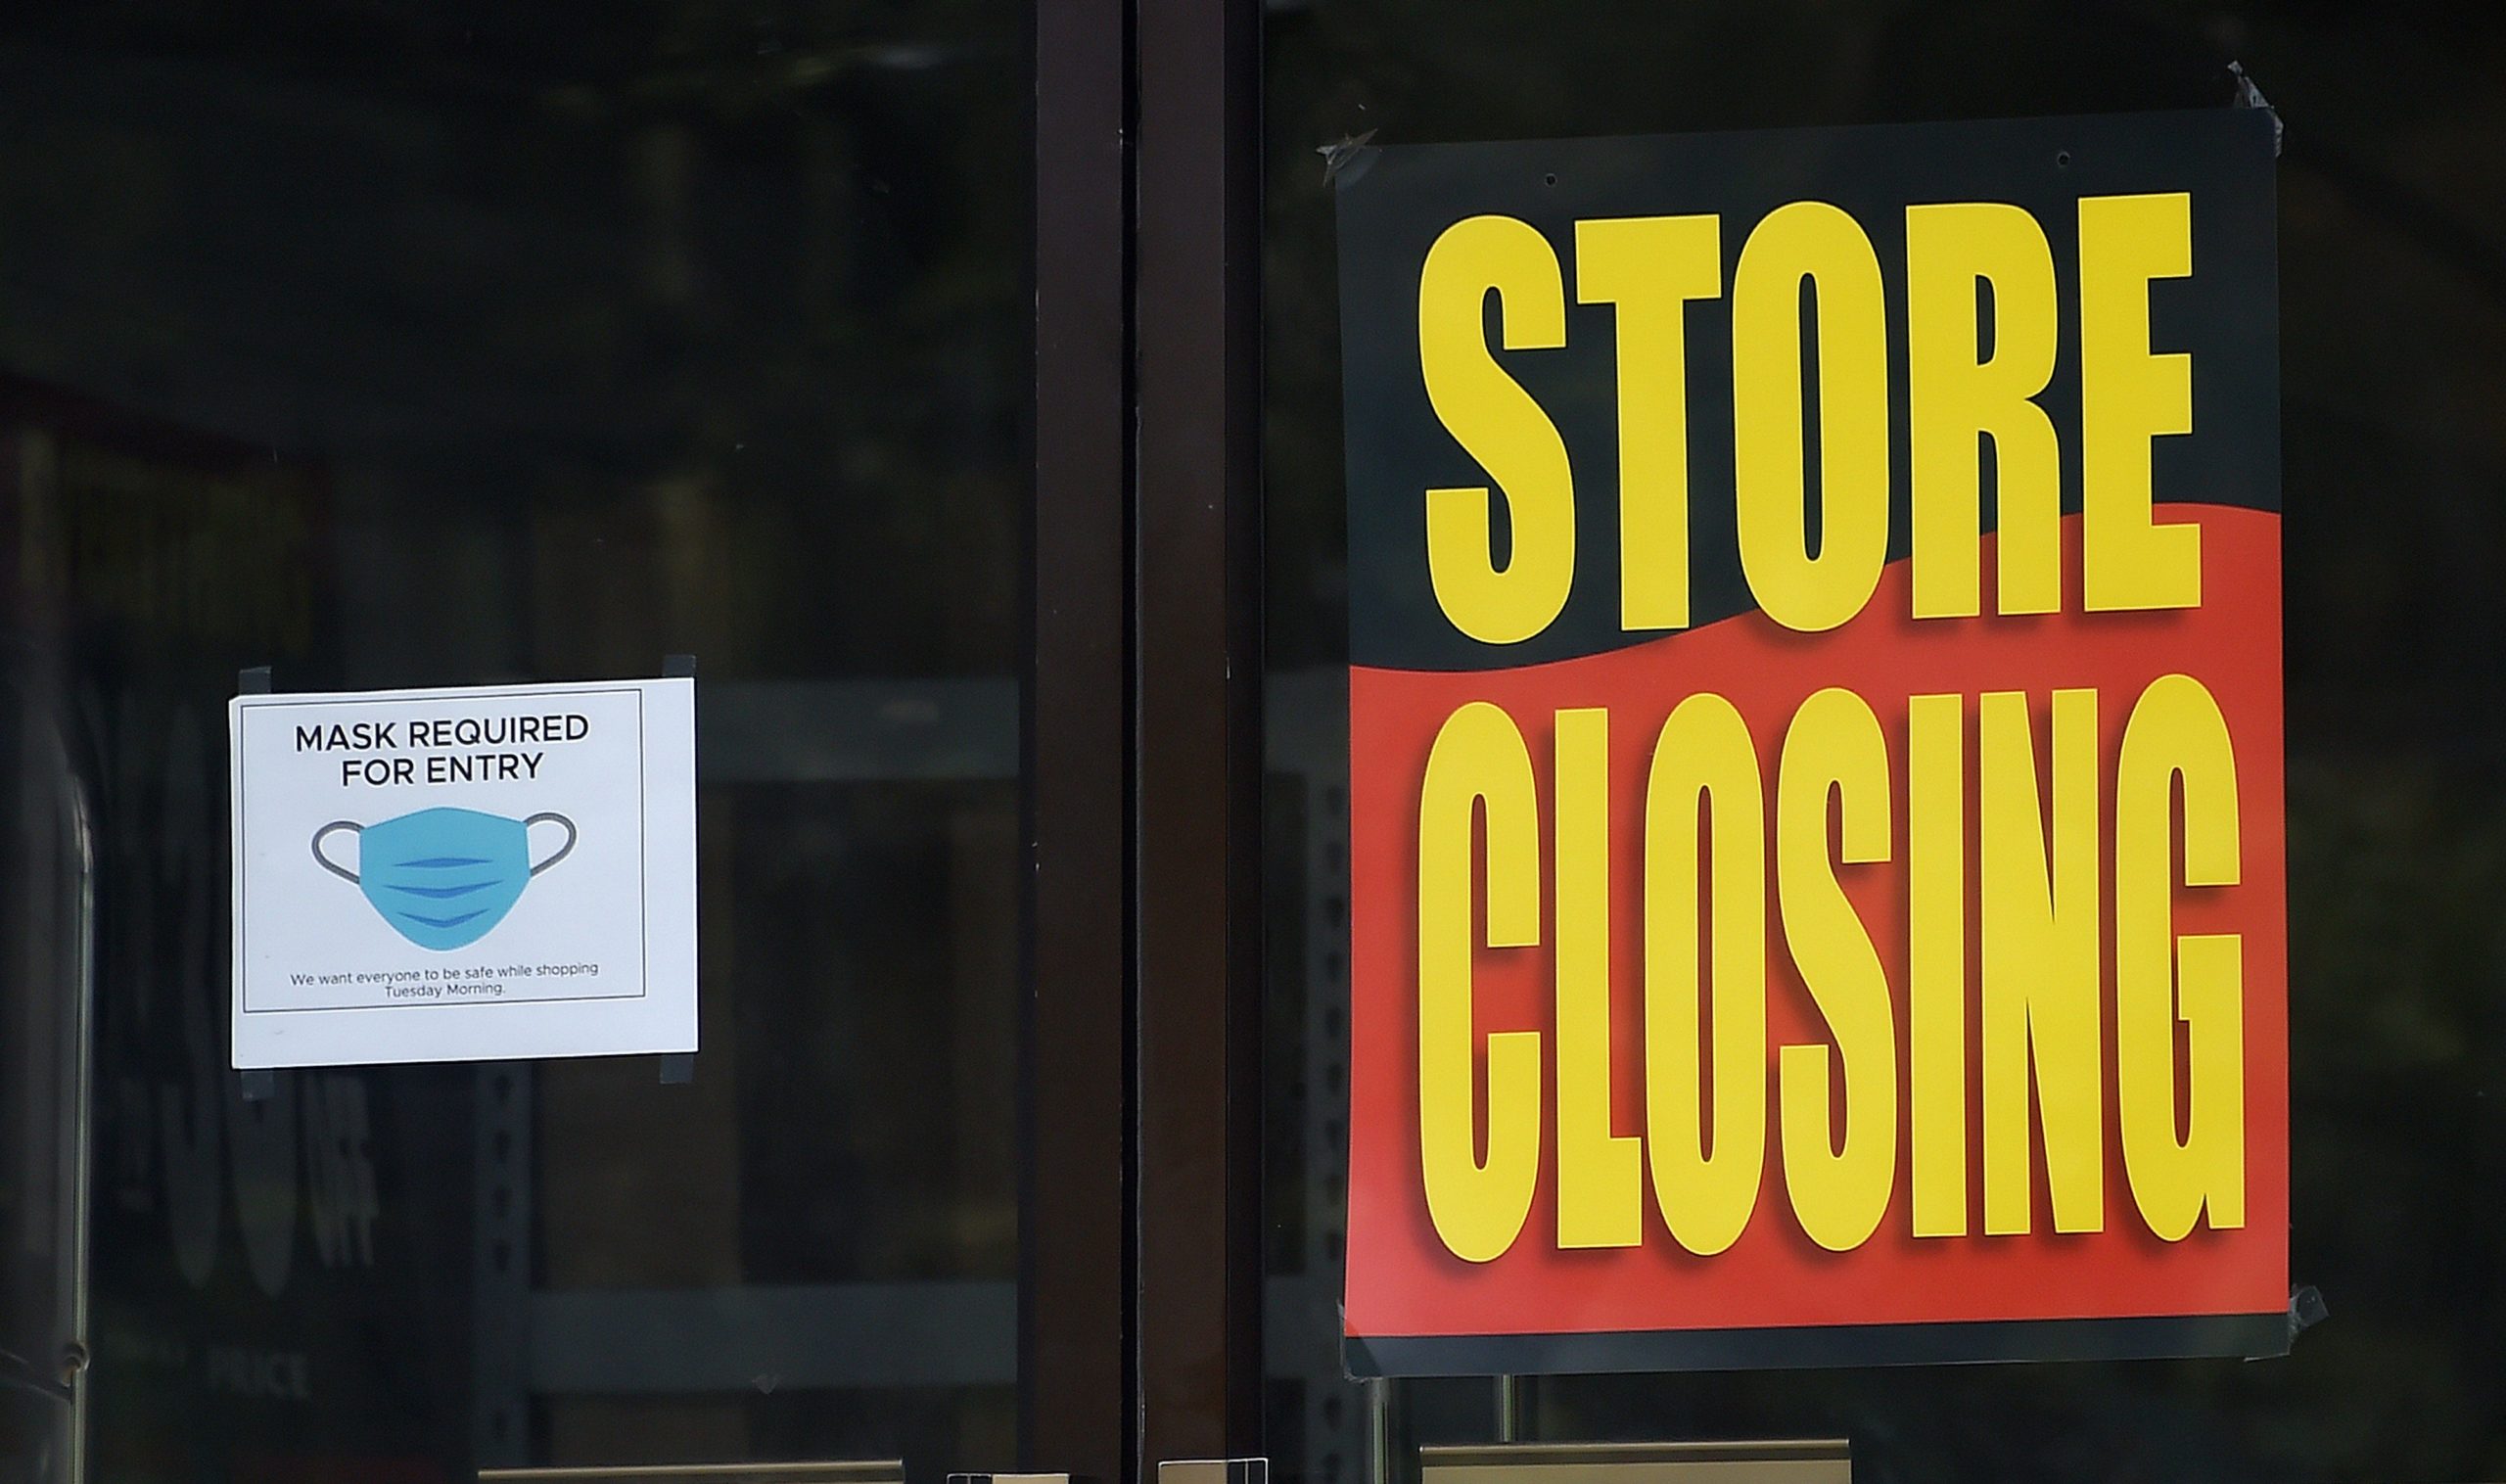 A store displays a sign before closing down permanently as more businesses feel the effects of stay-at-home orders amid the coronavirus pandemic, on June 16, 2020 in Arlington, Virginia. (Photo by Olivier DOULIERY / AFP) (Photo by OLIVIER DOULIERY/AFP via Getty Images)